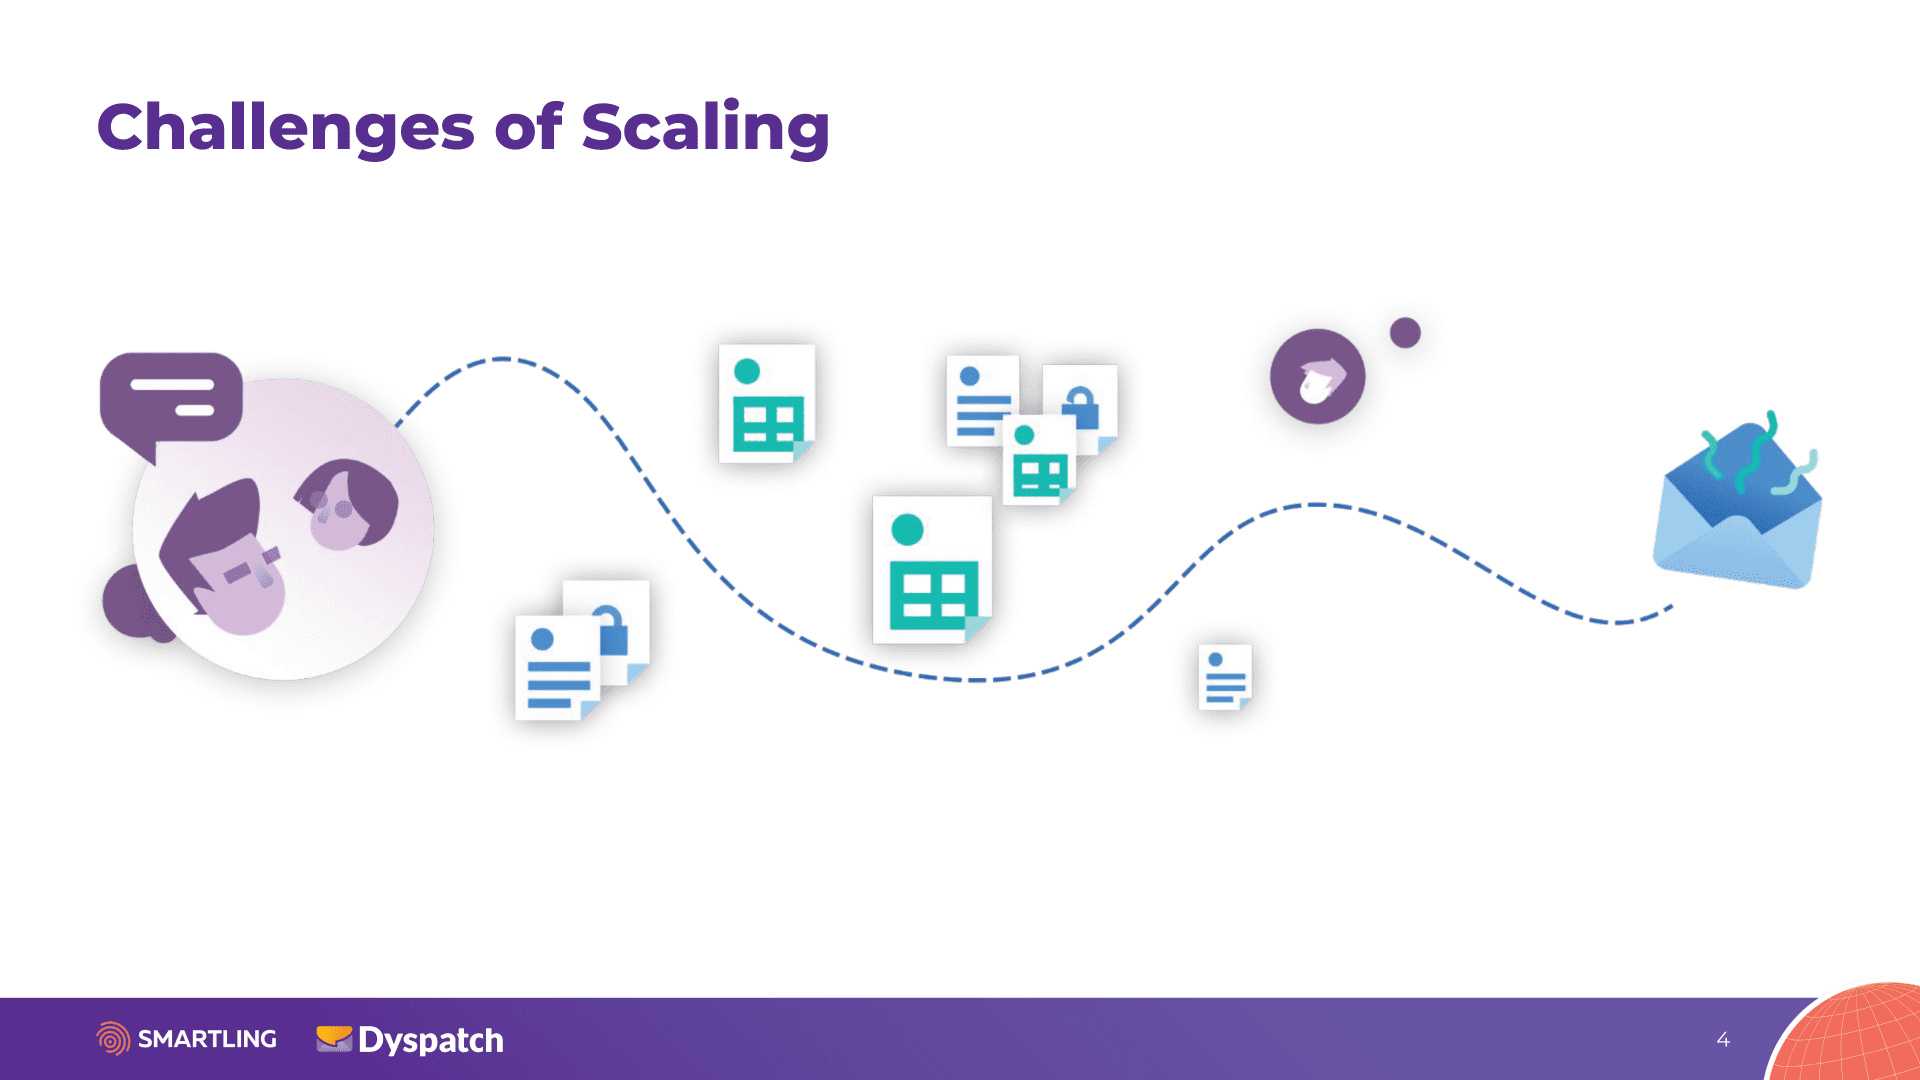 The Challenges of Scaling